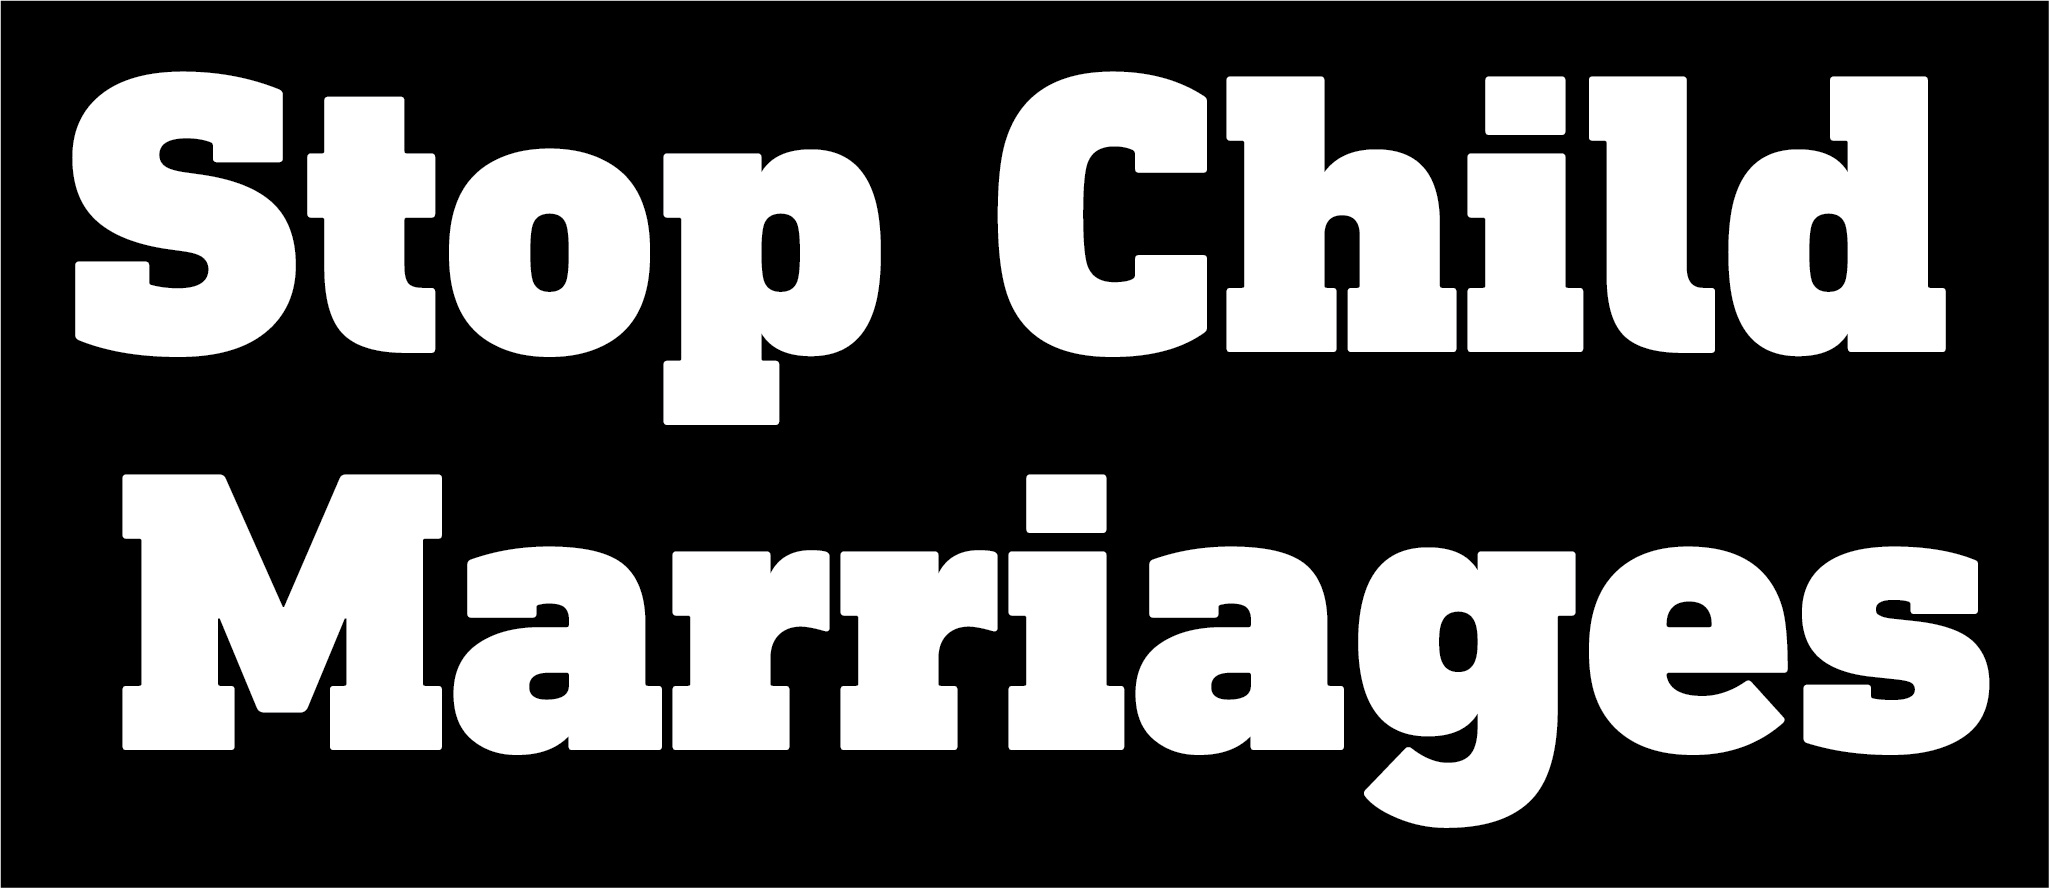 Stop-Child-Marriages-2-1